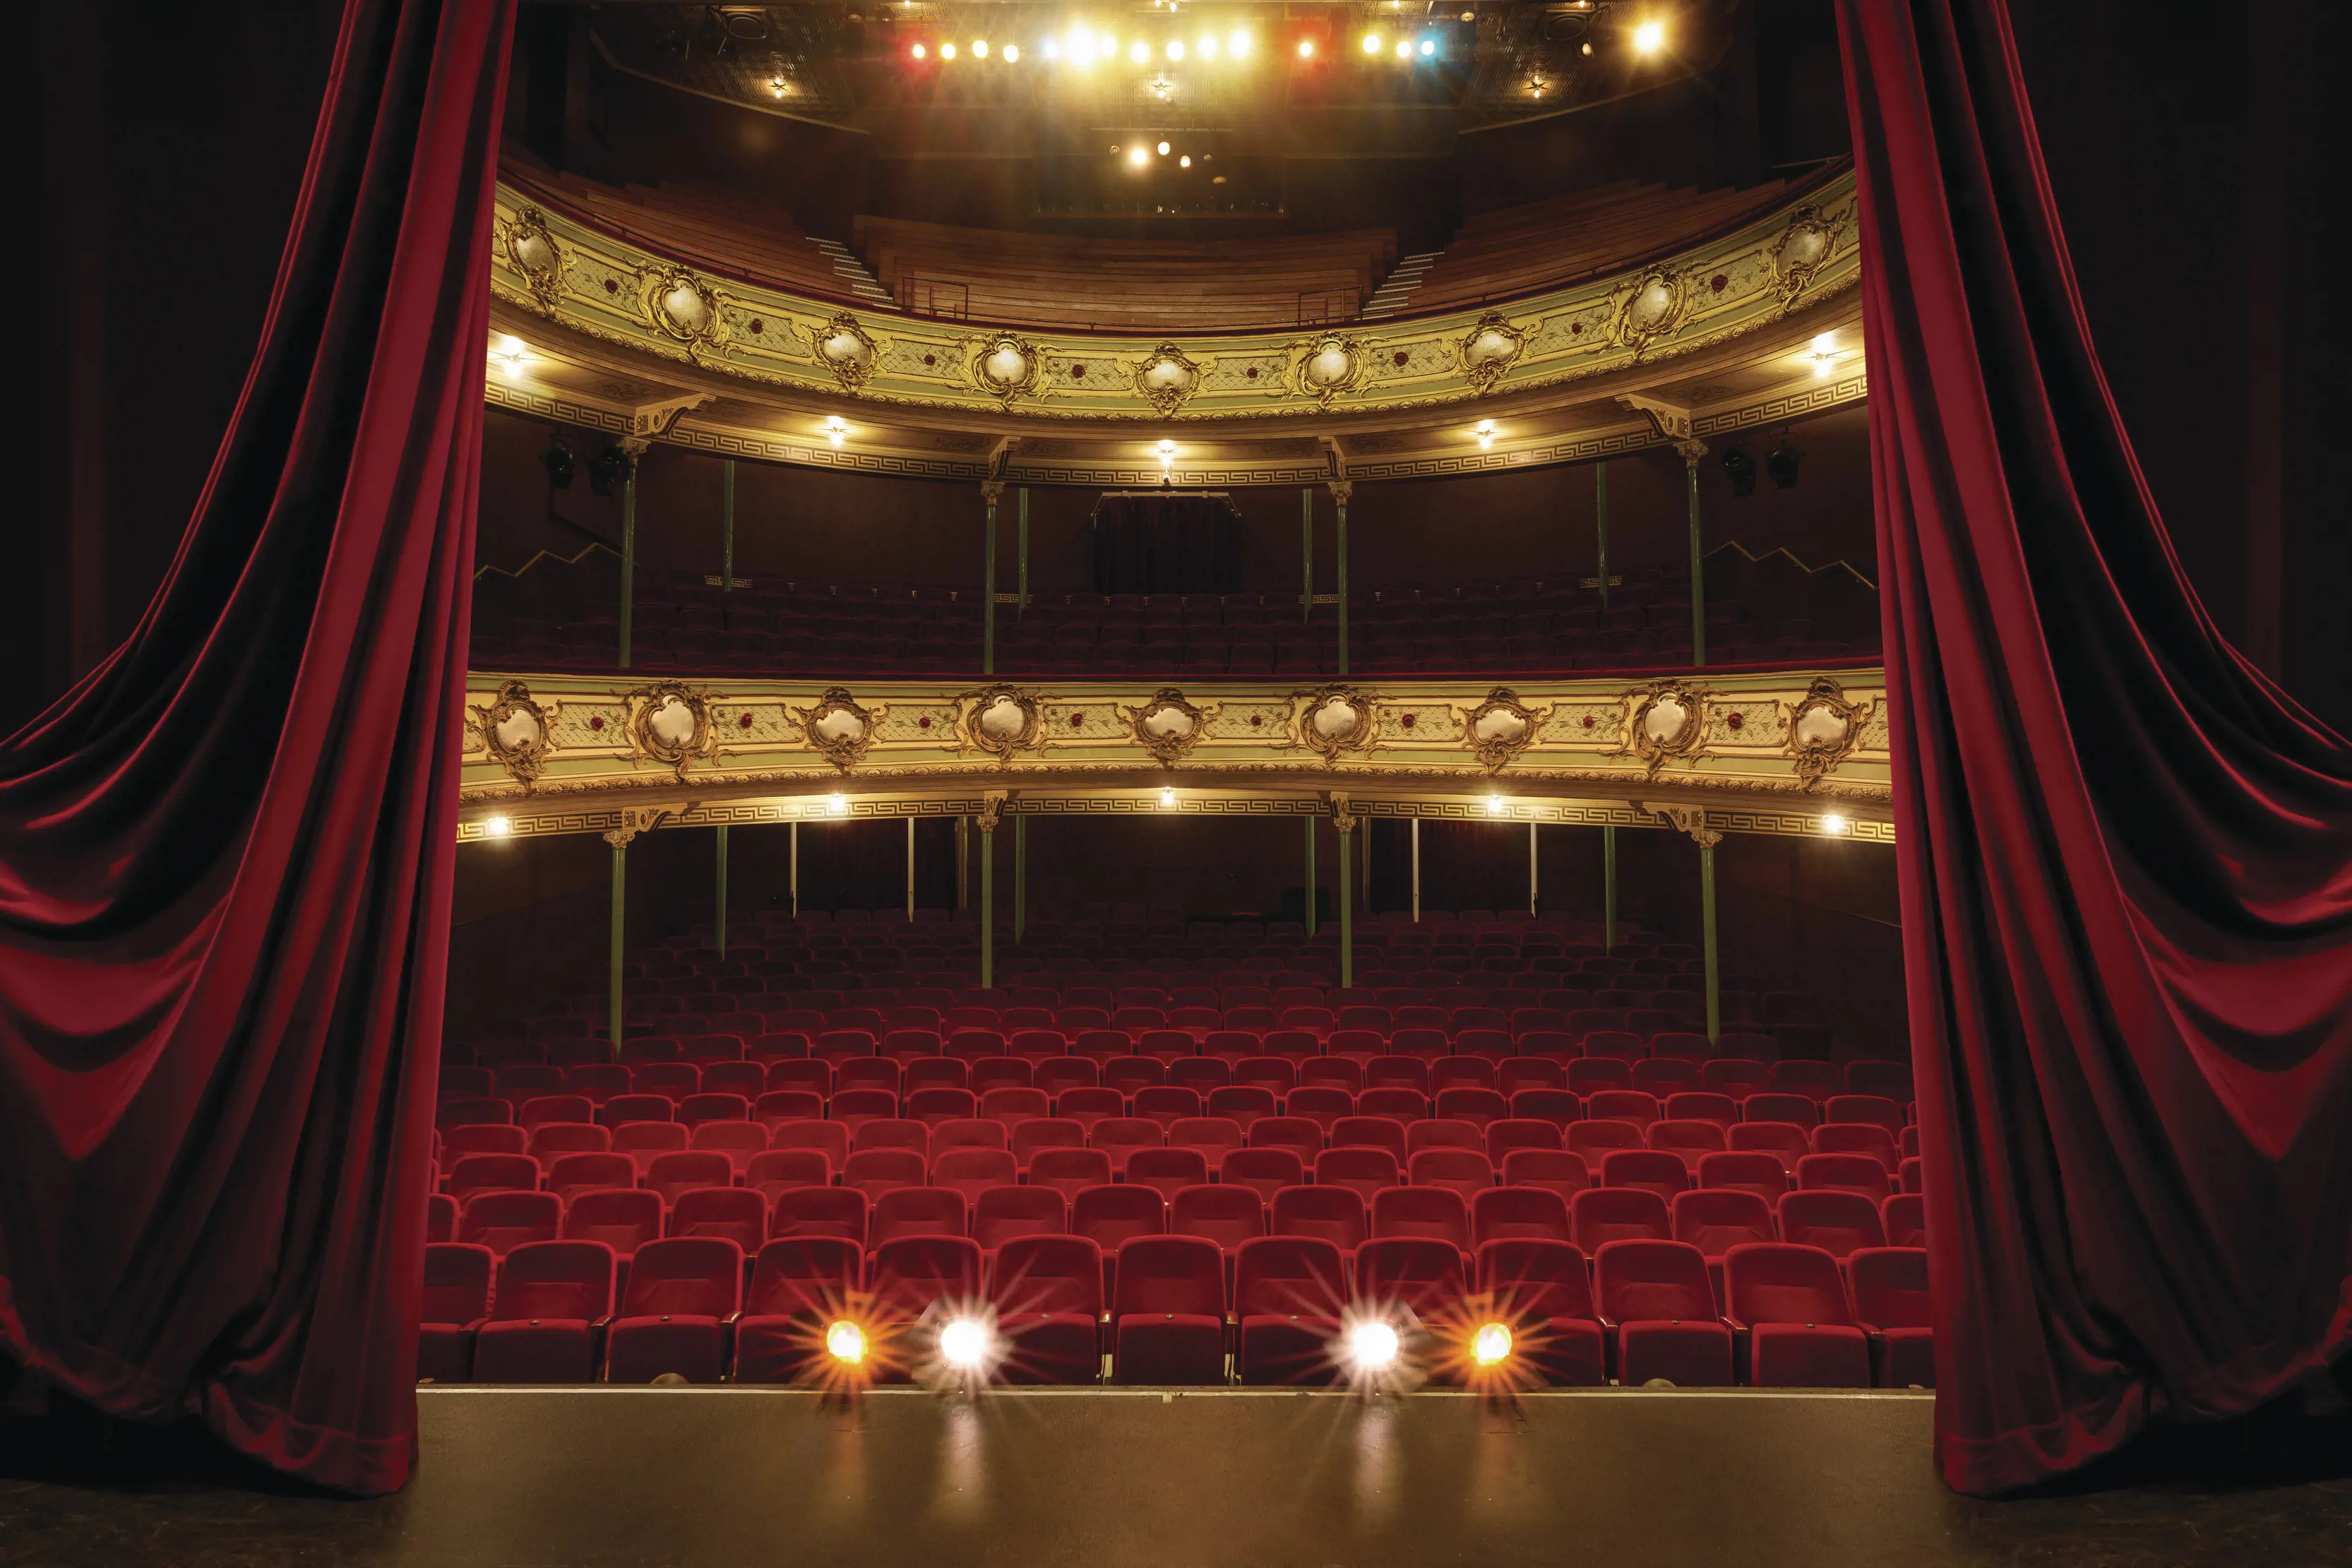 Interior image from the point of view of the stage, looking out at the empty red seats at Theatre Royal.